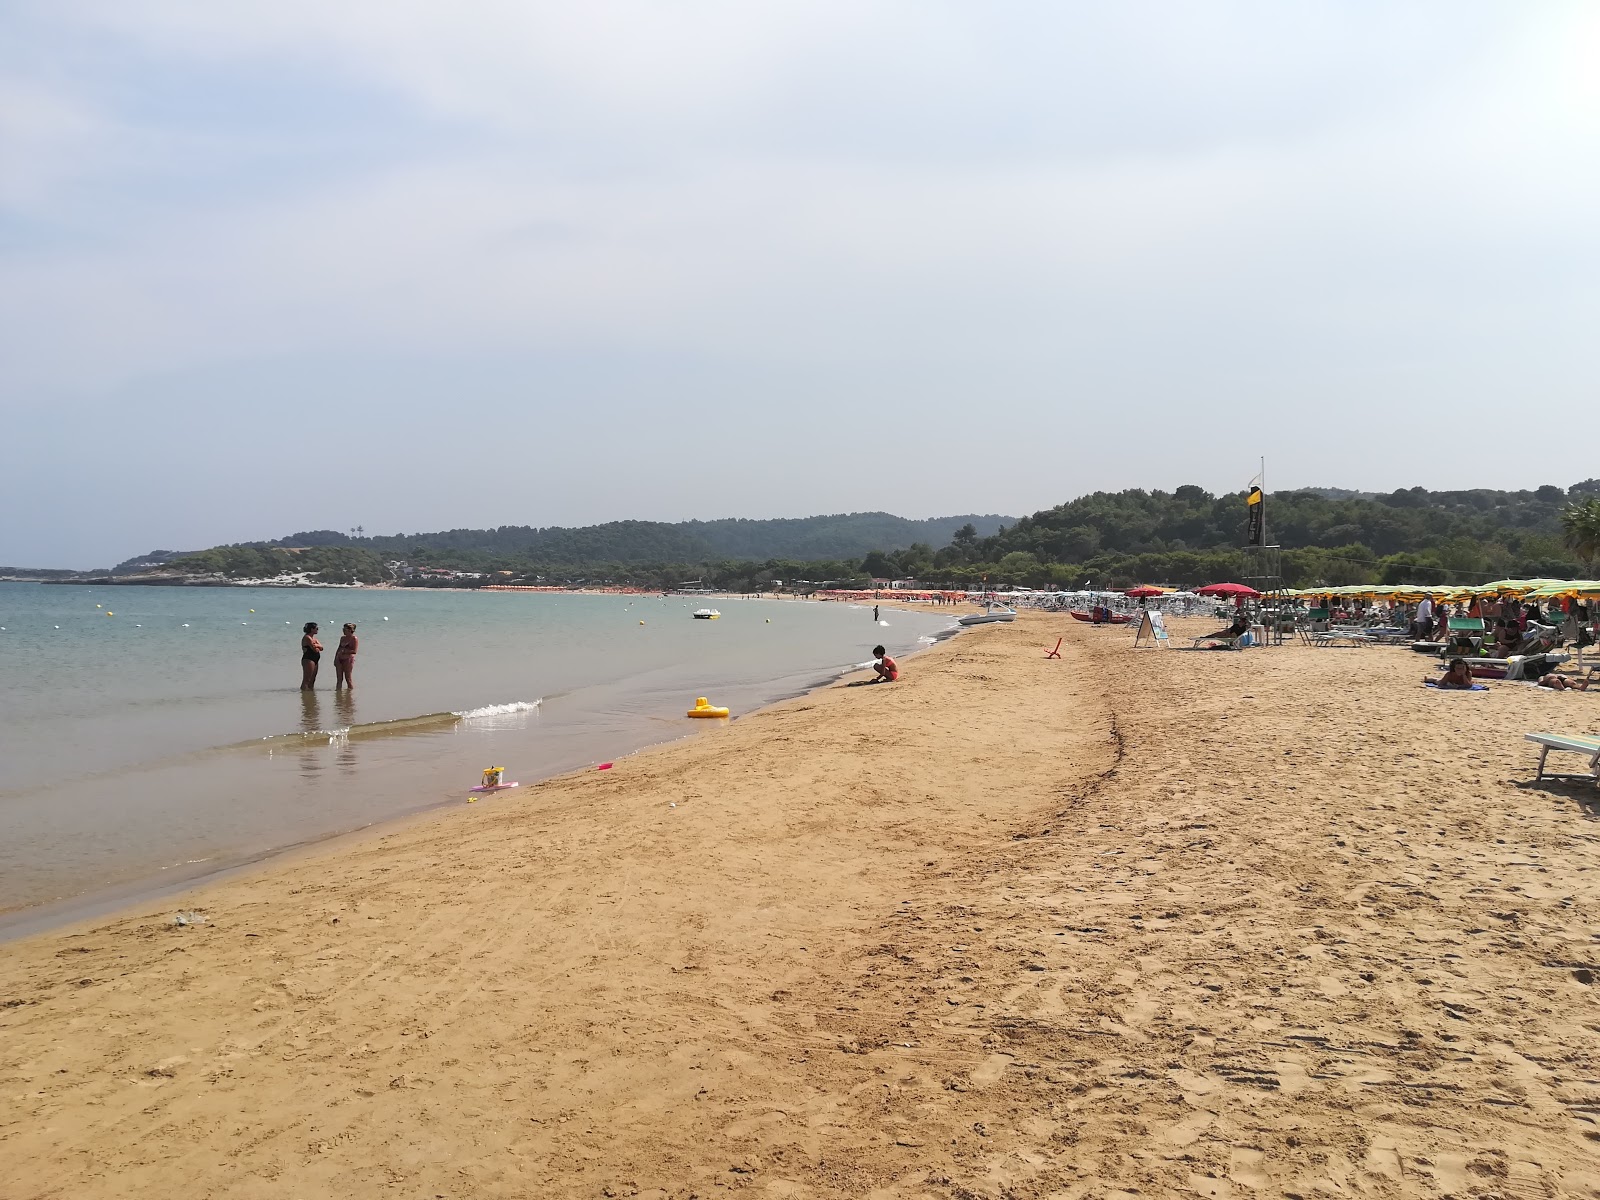 Photo of Spiaggia di Sfinale - recommended for family travellers with kids